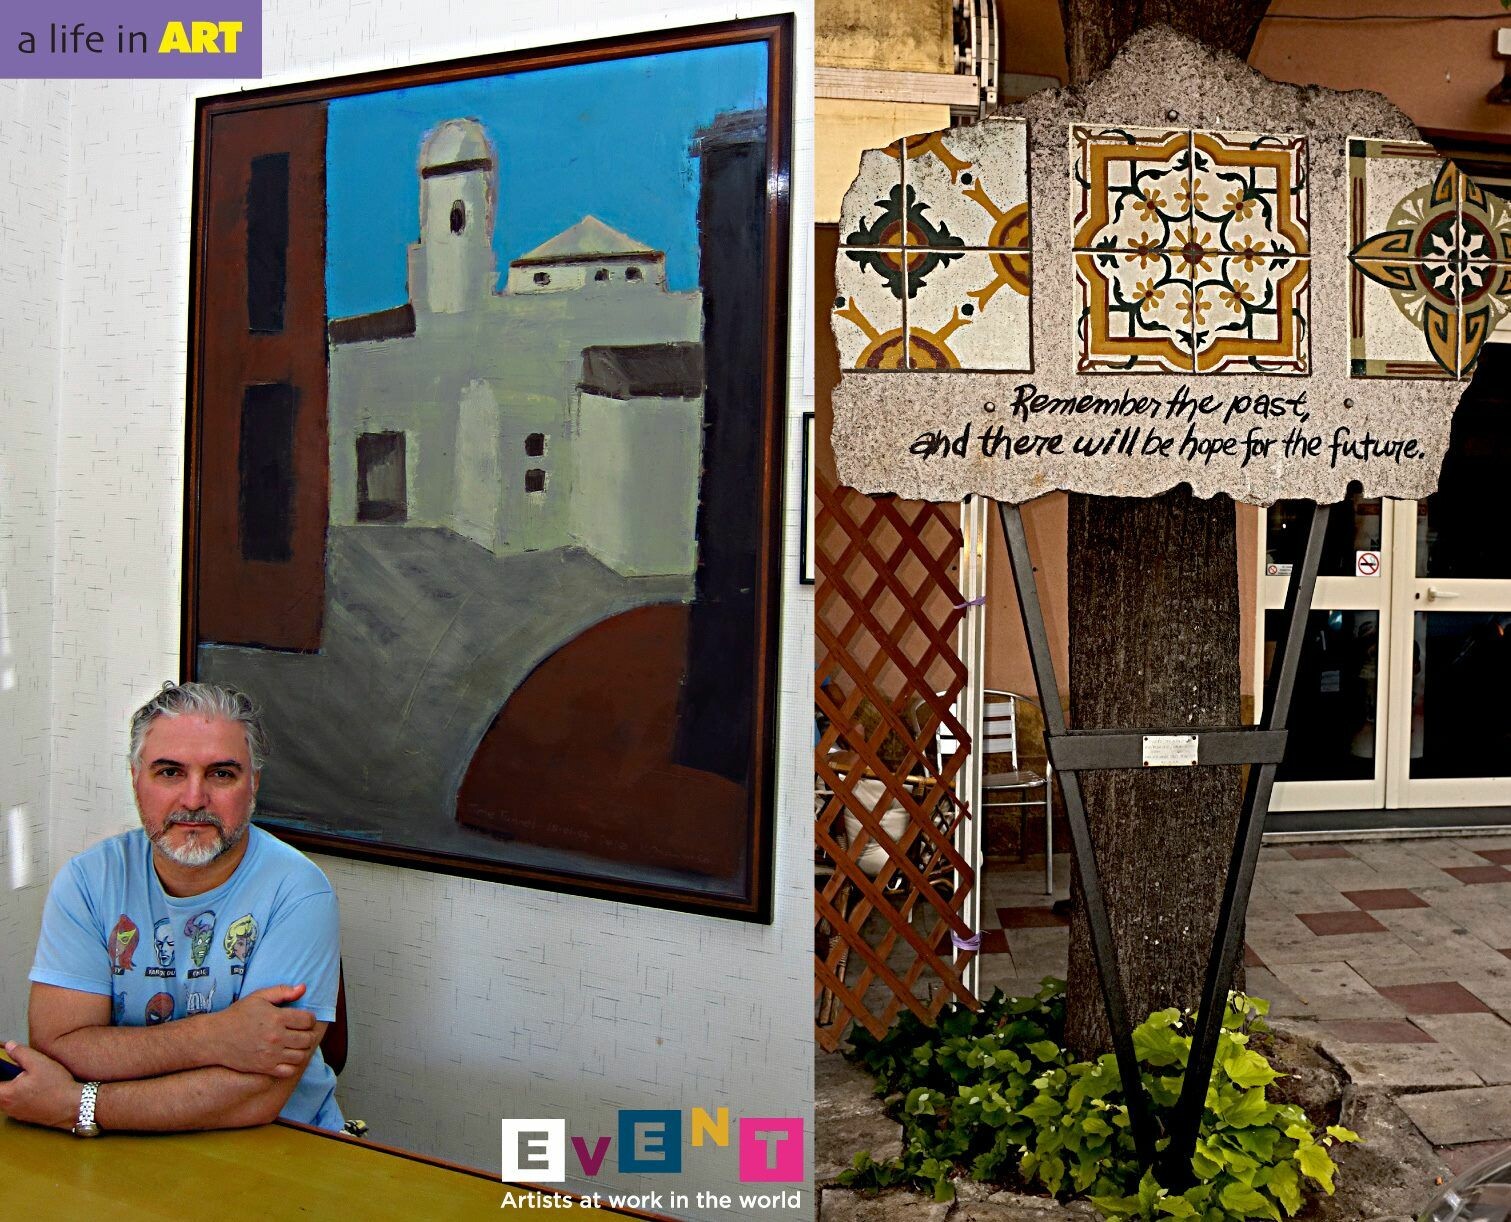 Vince Mancuso in Italy with his painting IT BEGINS, 4x5 feet, oil on canvas and to the right photo of his public sculpture in the town of Delia, Italy.